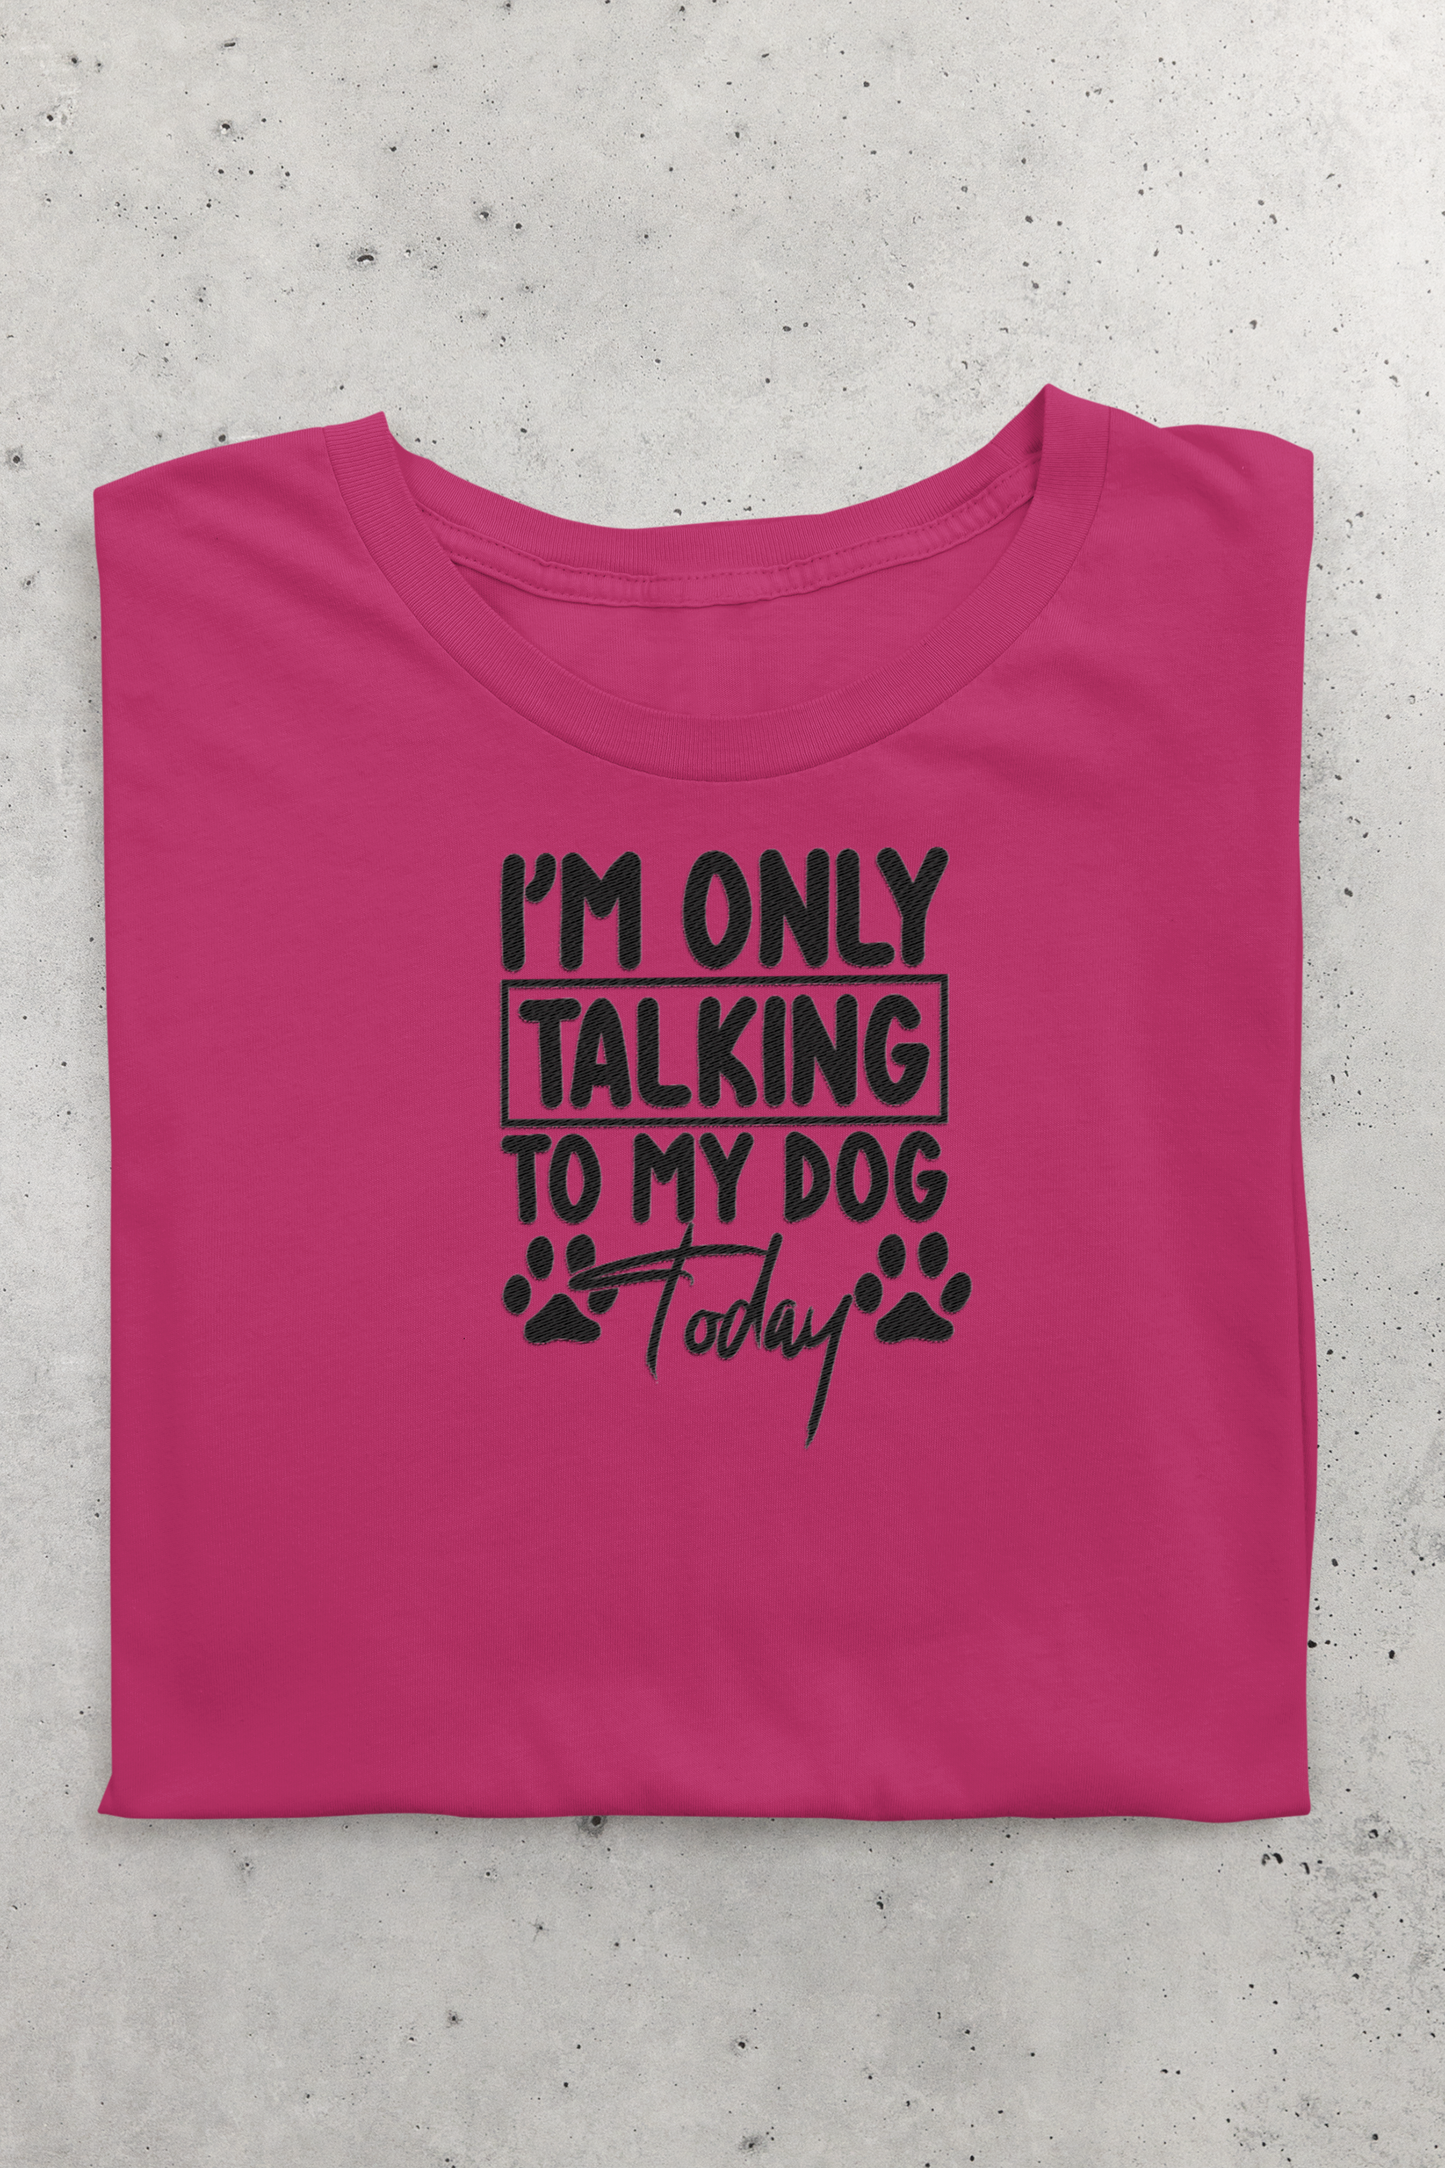 I'm only talking to my dog today crew neck